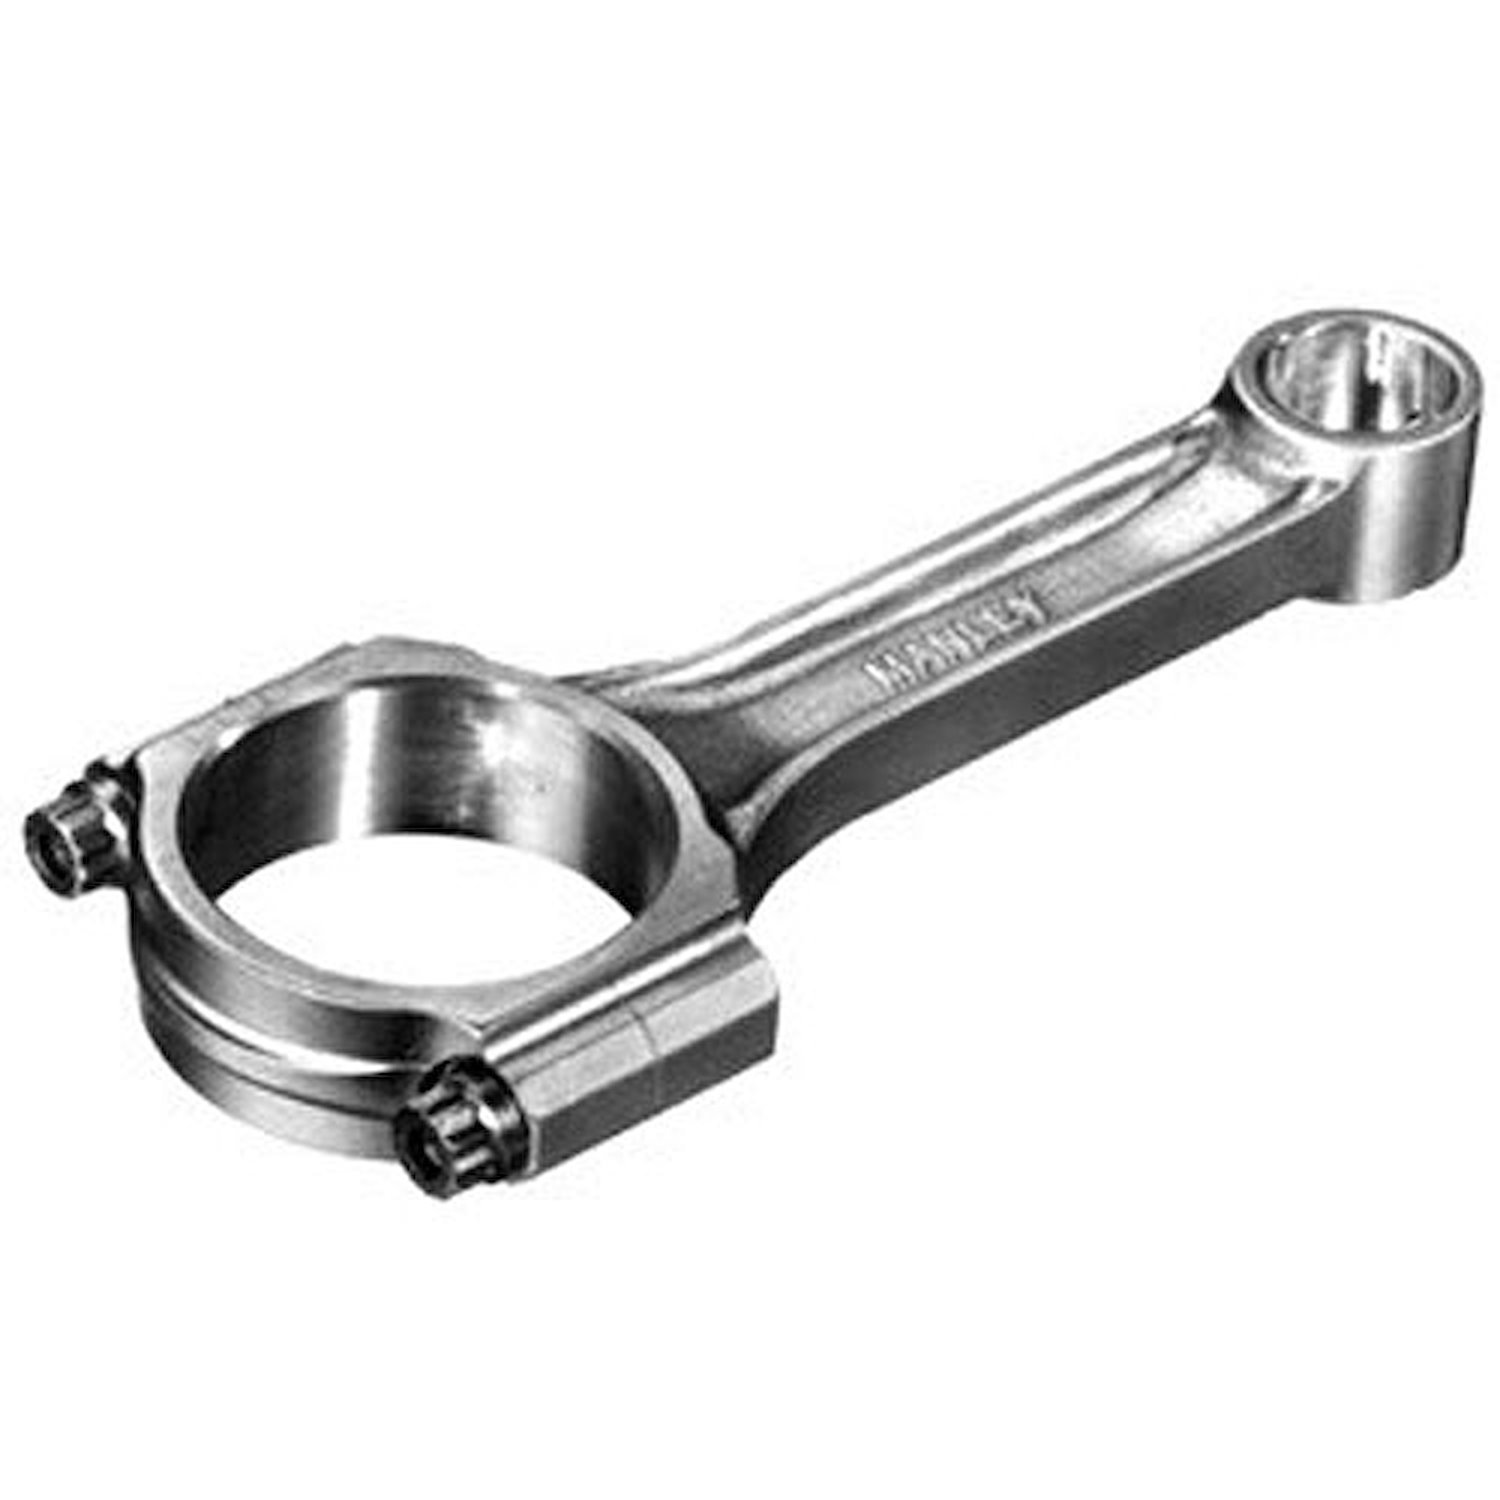 Sportsmaster Connecting Rods Center-to-Center: 6.125"